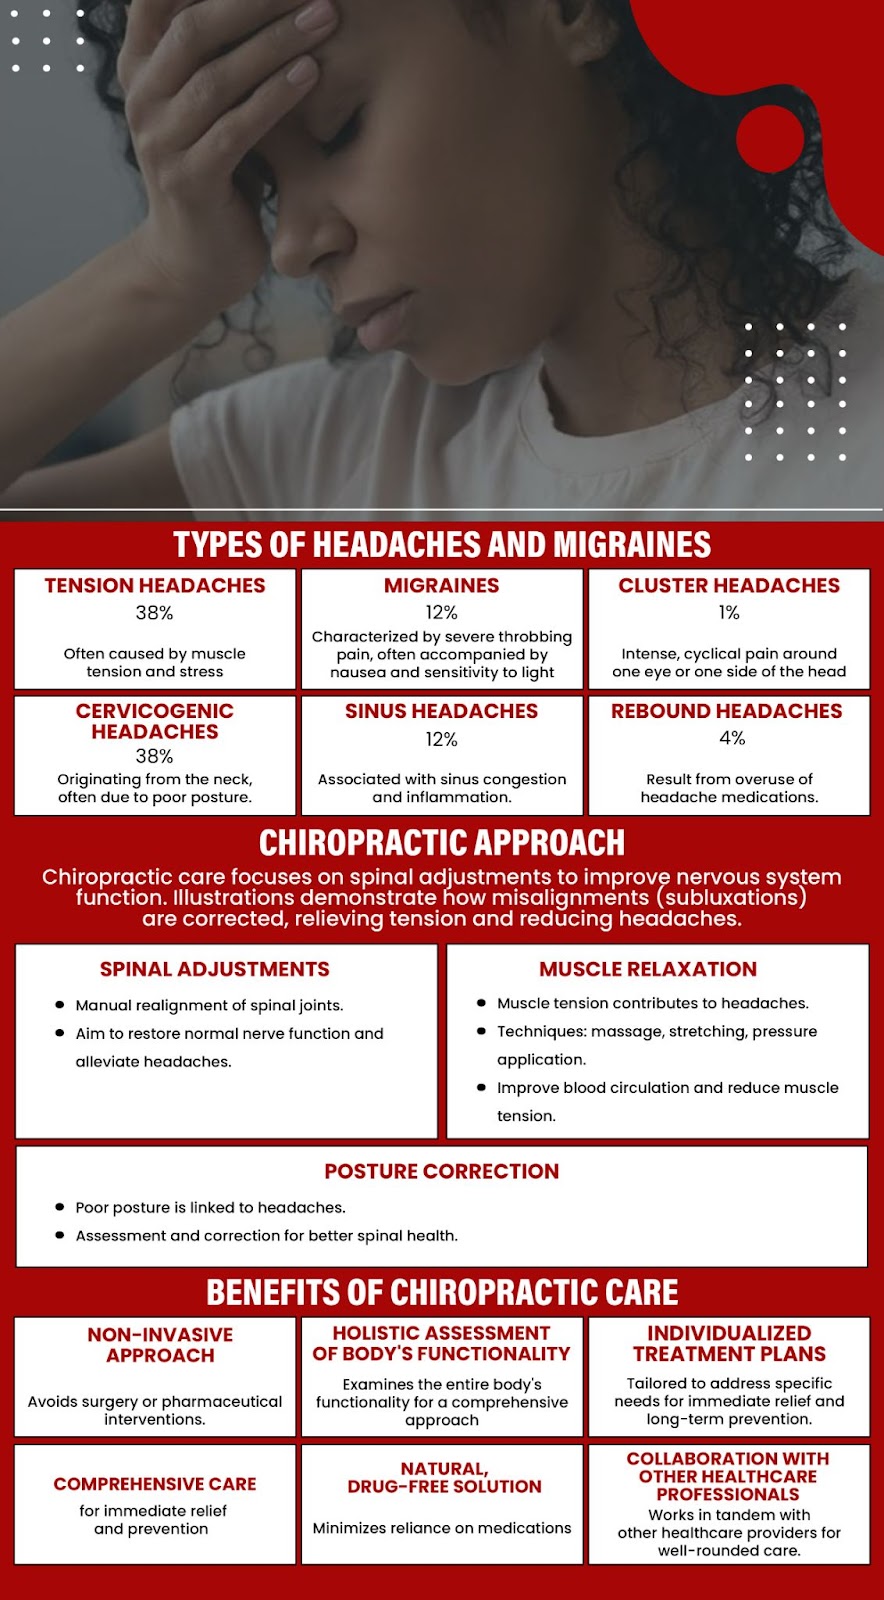 Chiropractic Solutions For Headache Relief